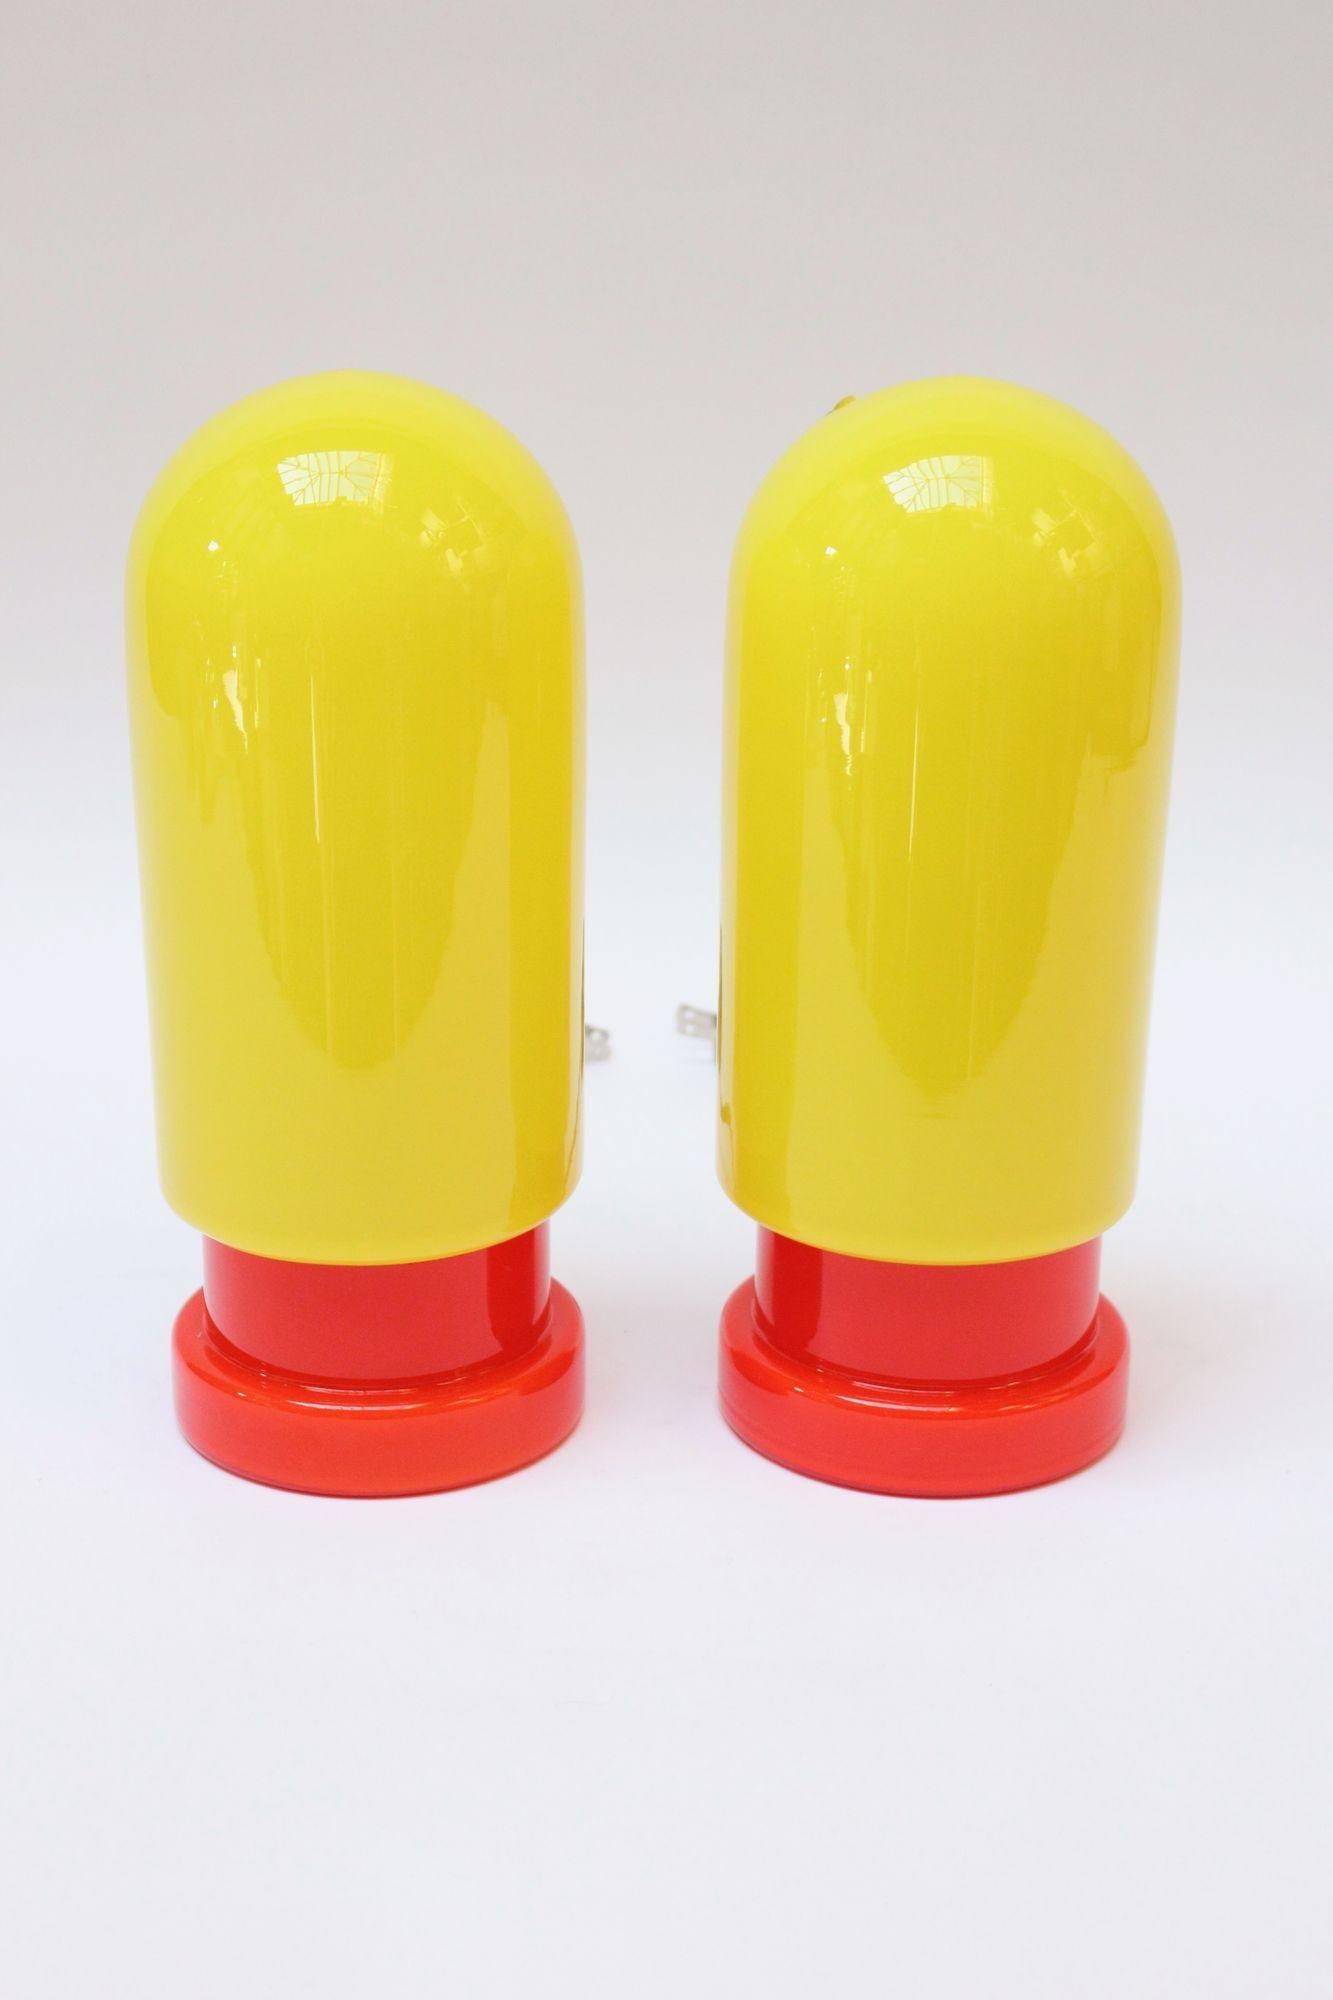 Pair of Swedish 'Capsule' form table lamps in neon yellow and red/orange blown glass (ca. 1960s).
Blend well with post-modern and mid-century modern decor, alike. 
Excellent, vintage condition with the original Swedish stickers still intact. Newly